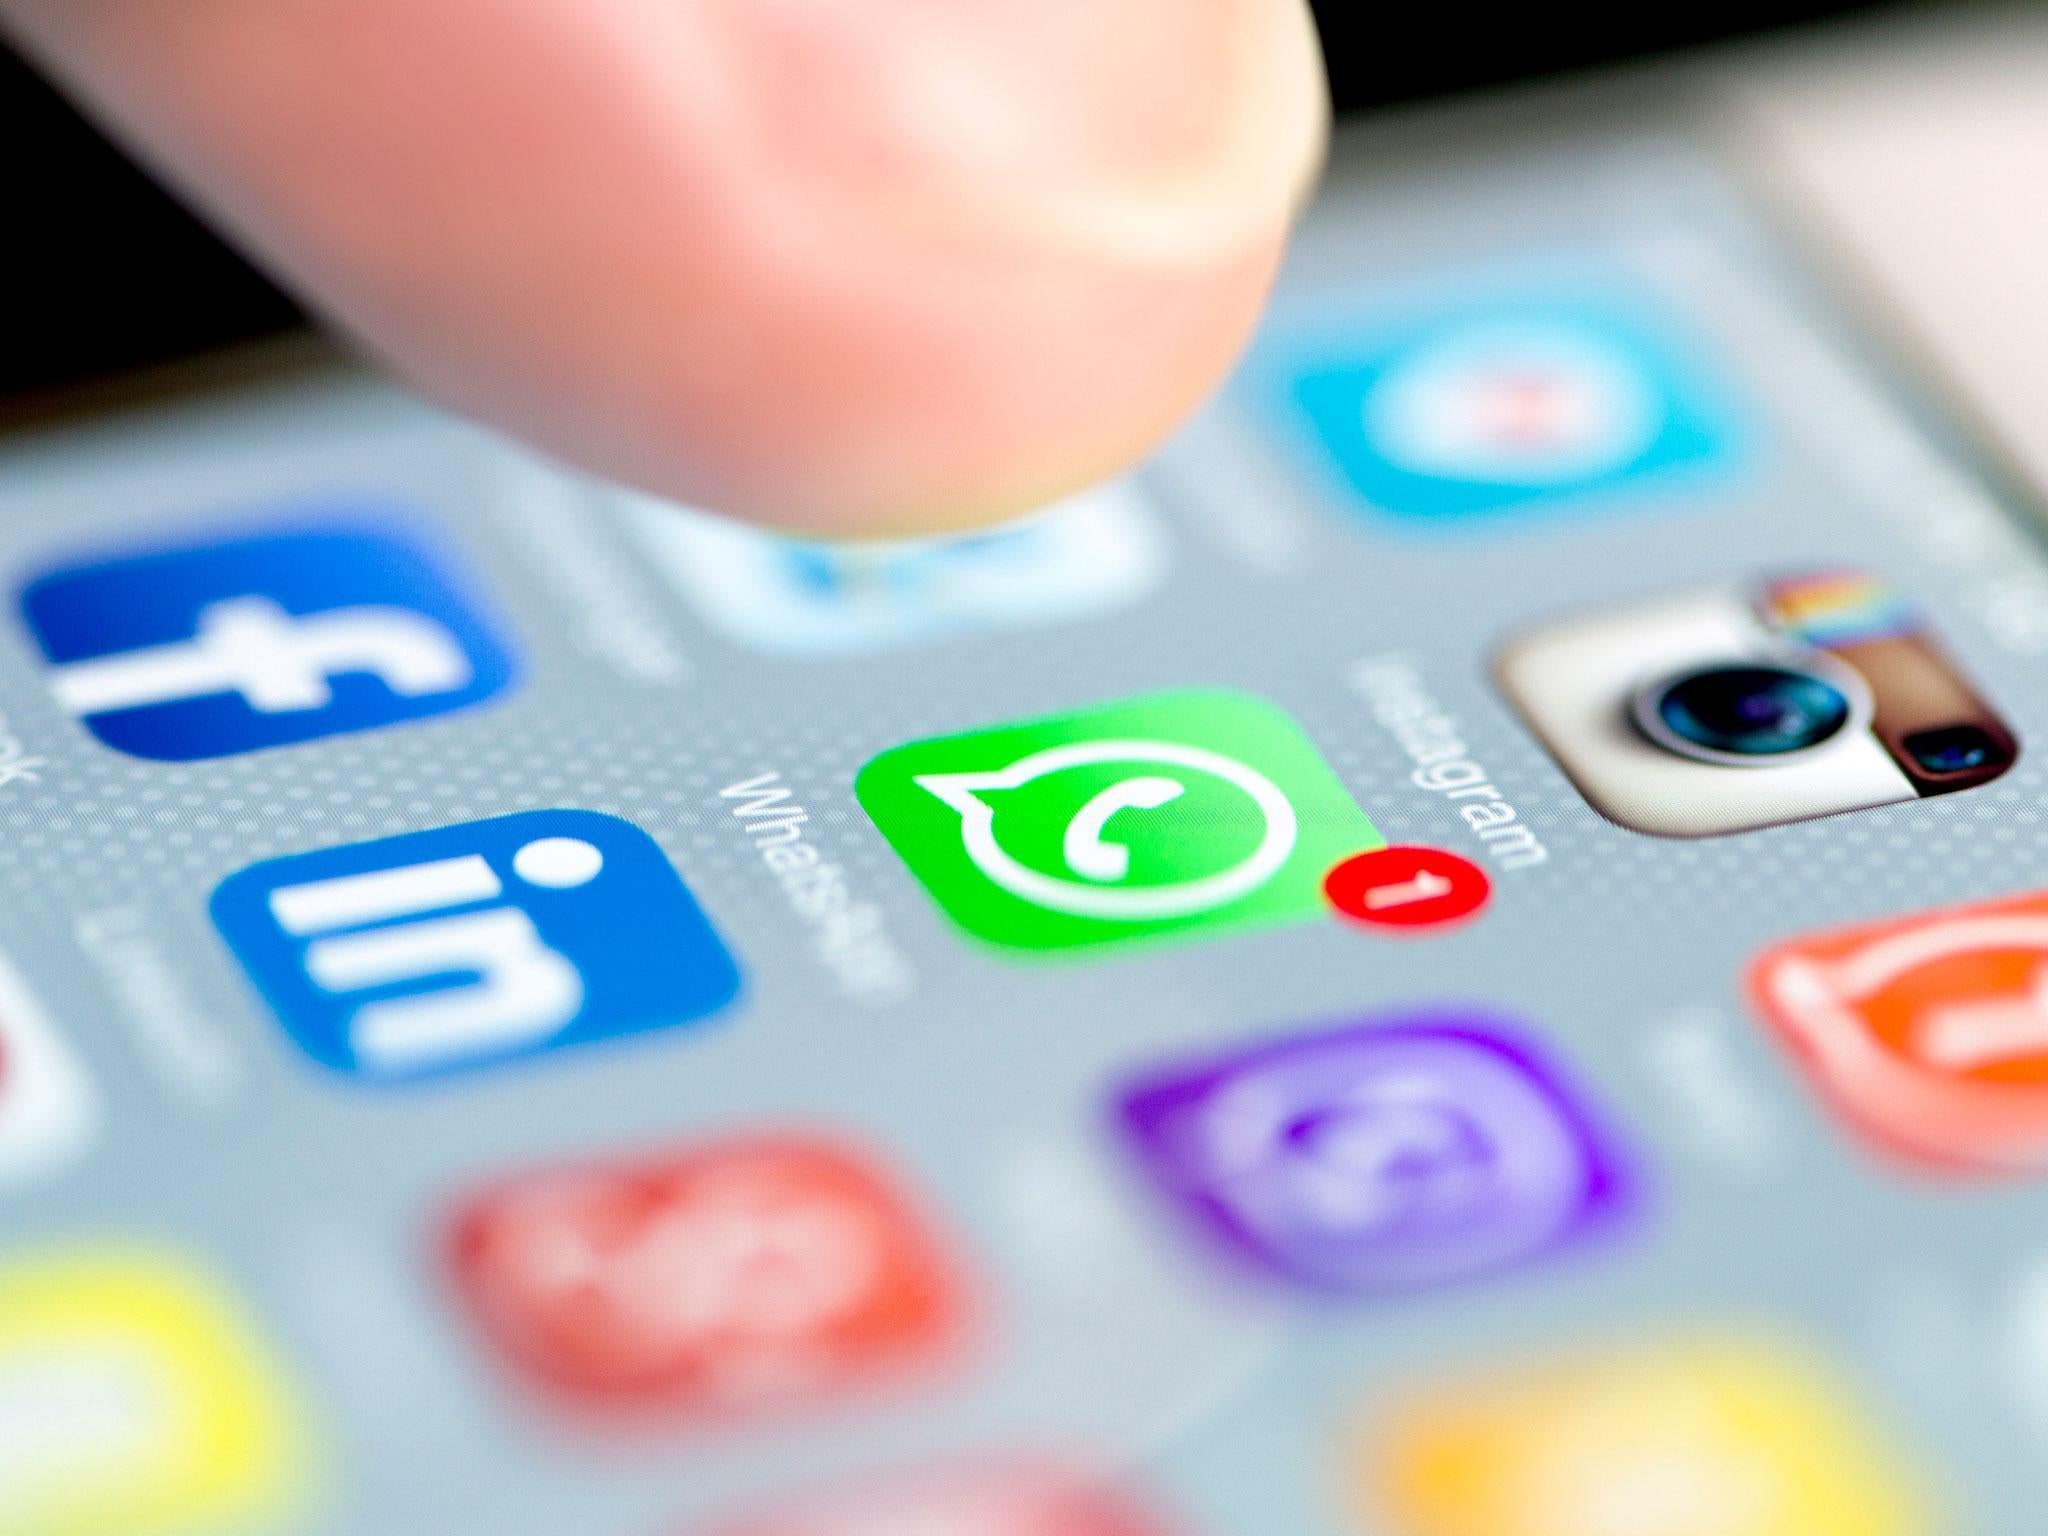 WhatsApp is enormously popular among both Android and iOS users